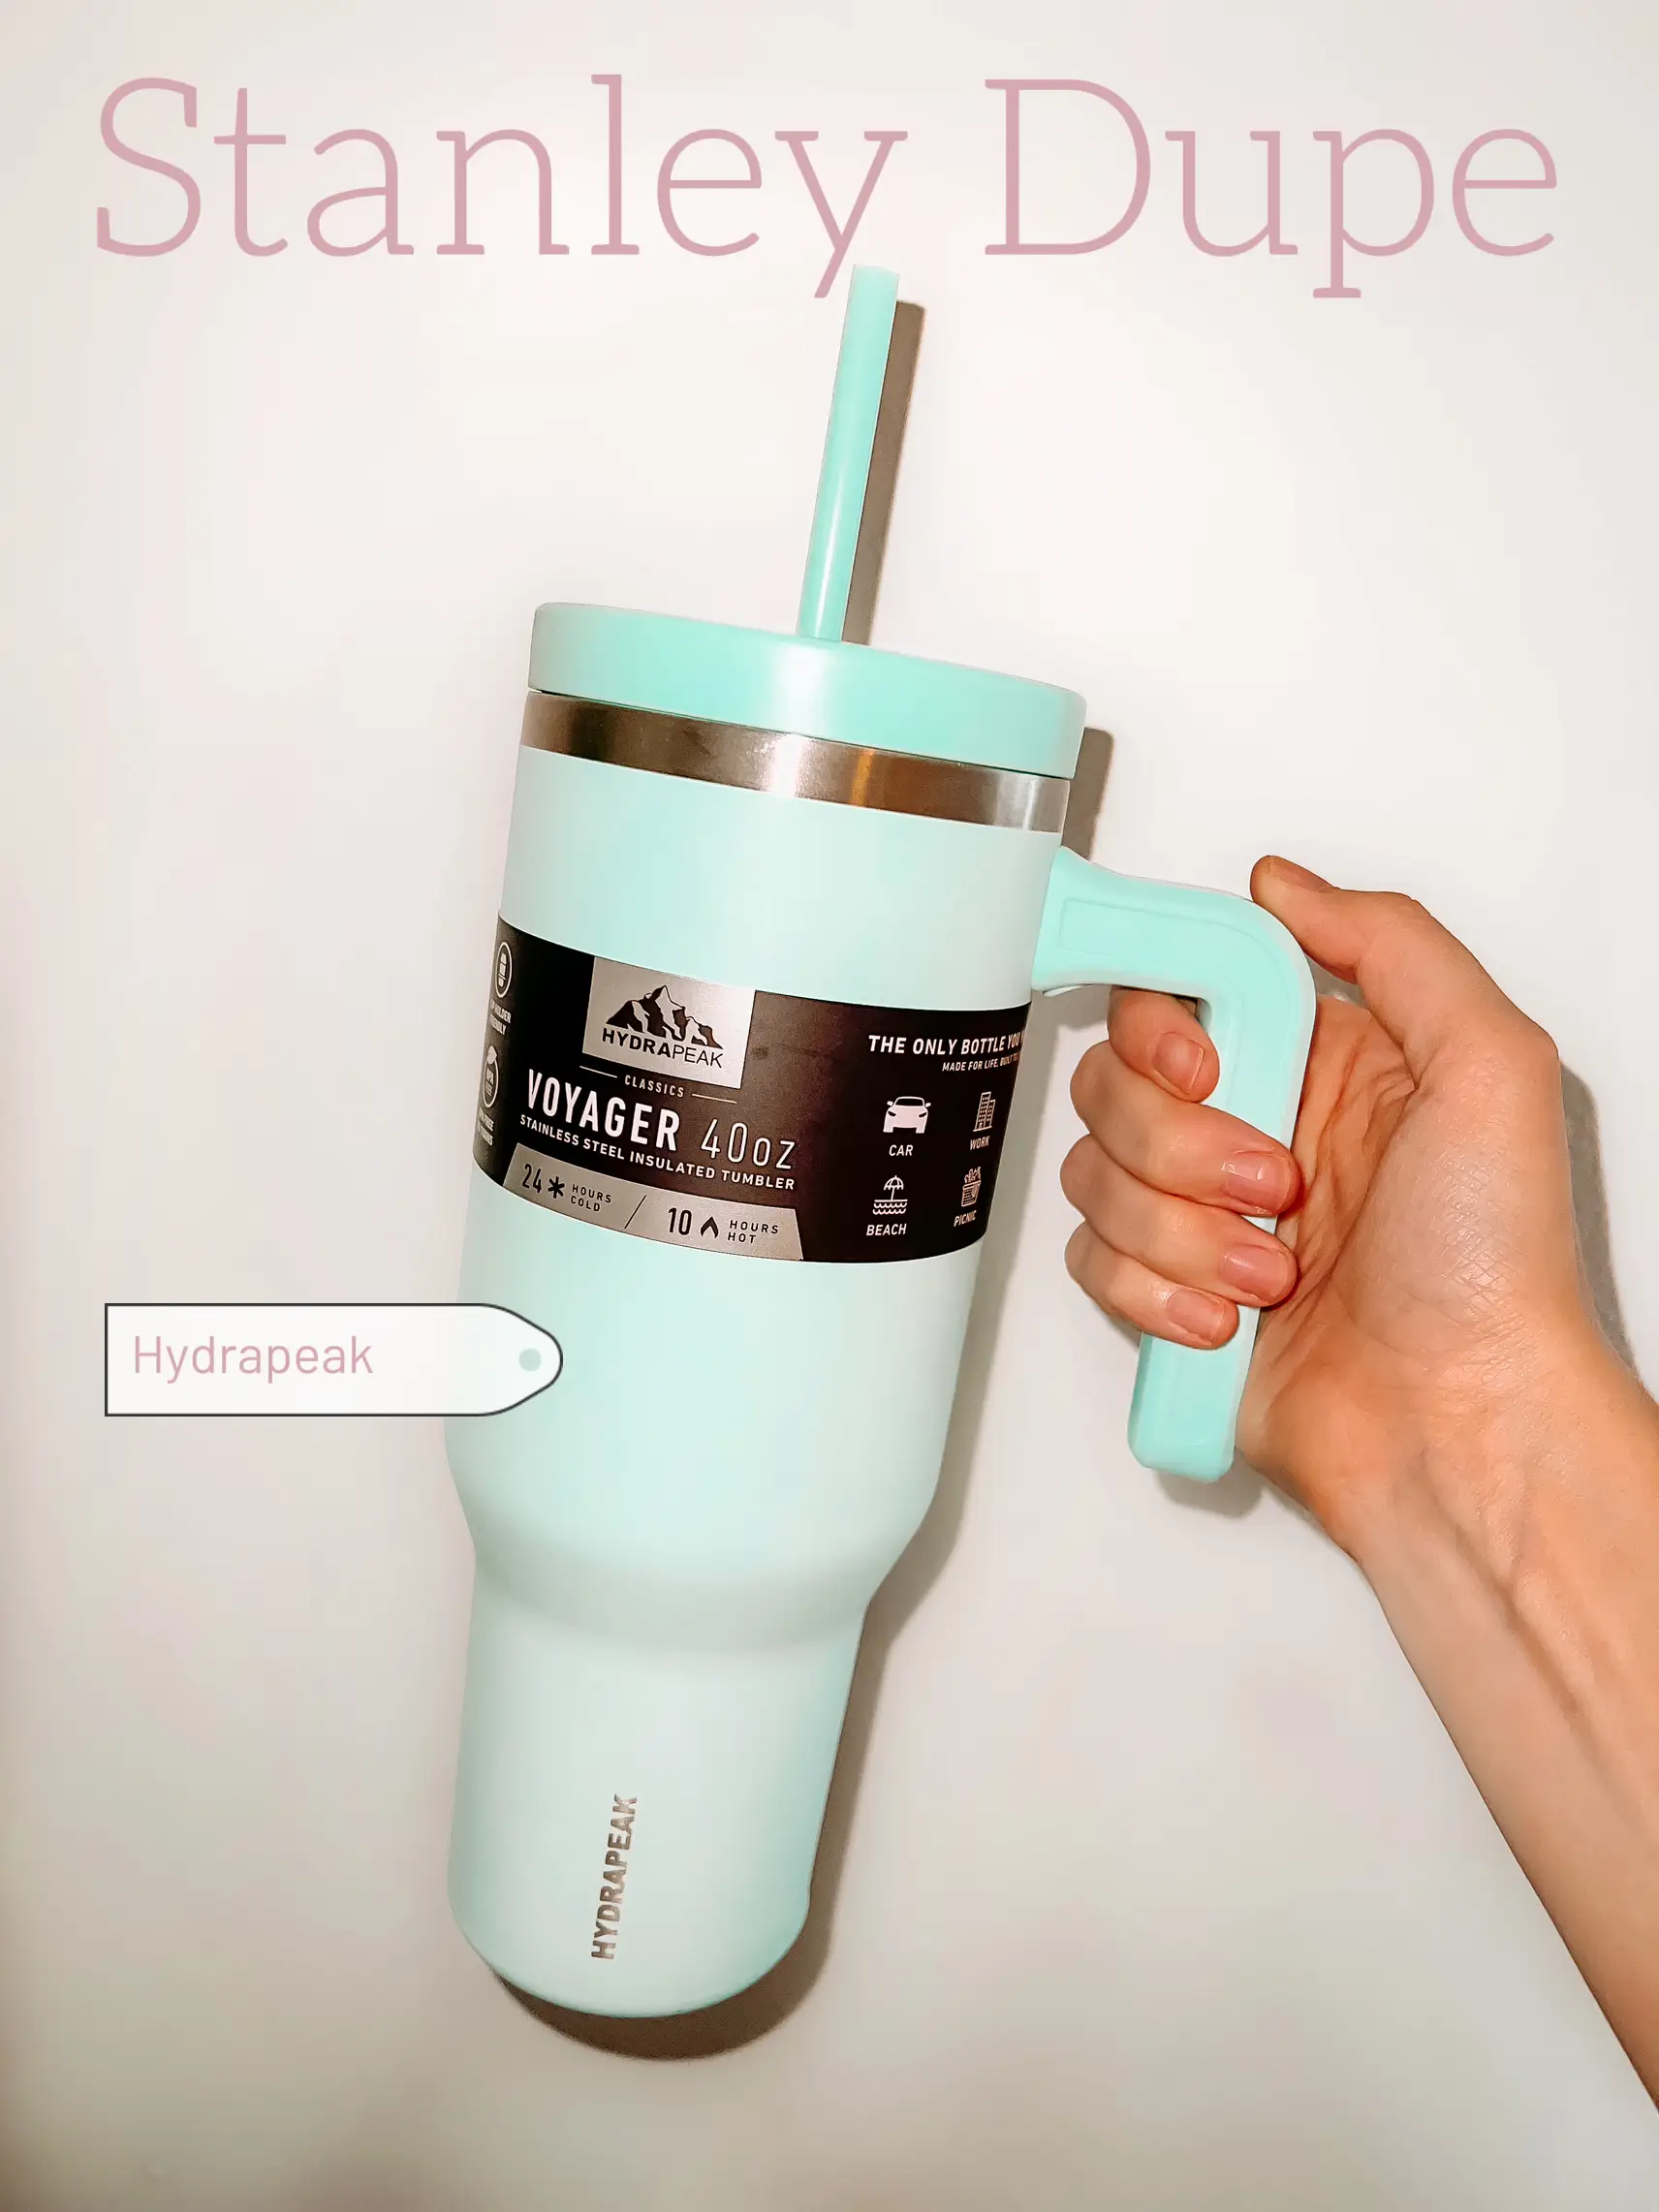 Pink Starbucks x Stanley cup dupes: Shop these 10 alternatives